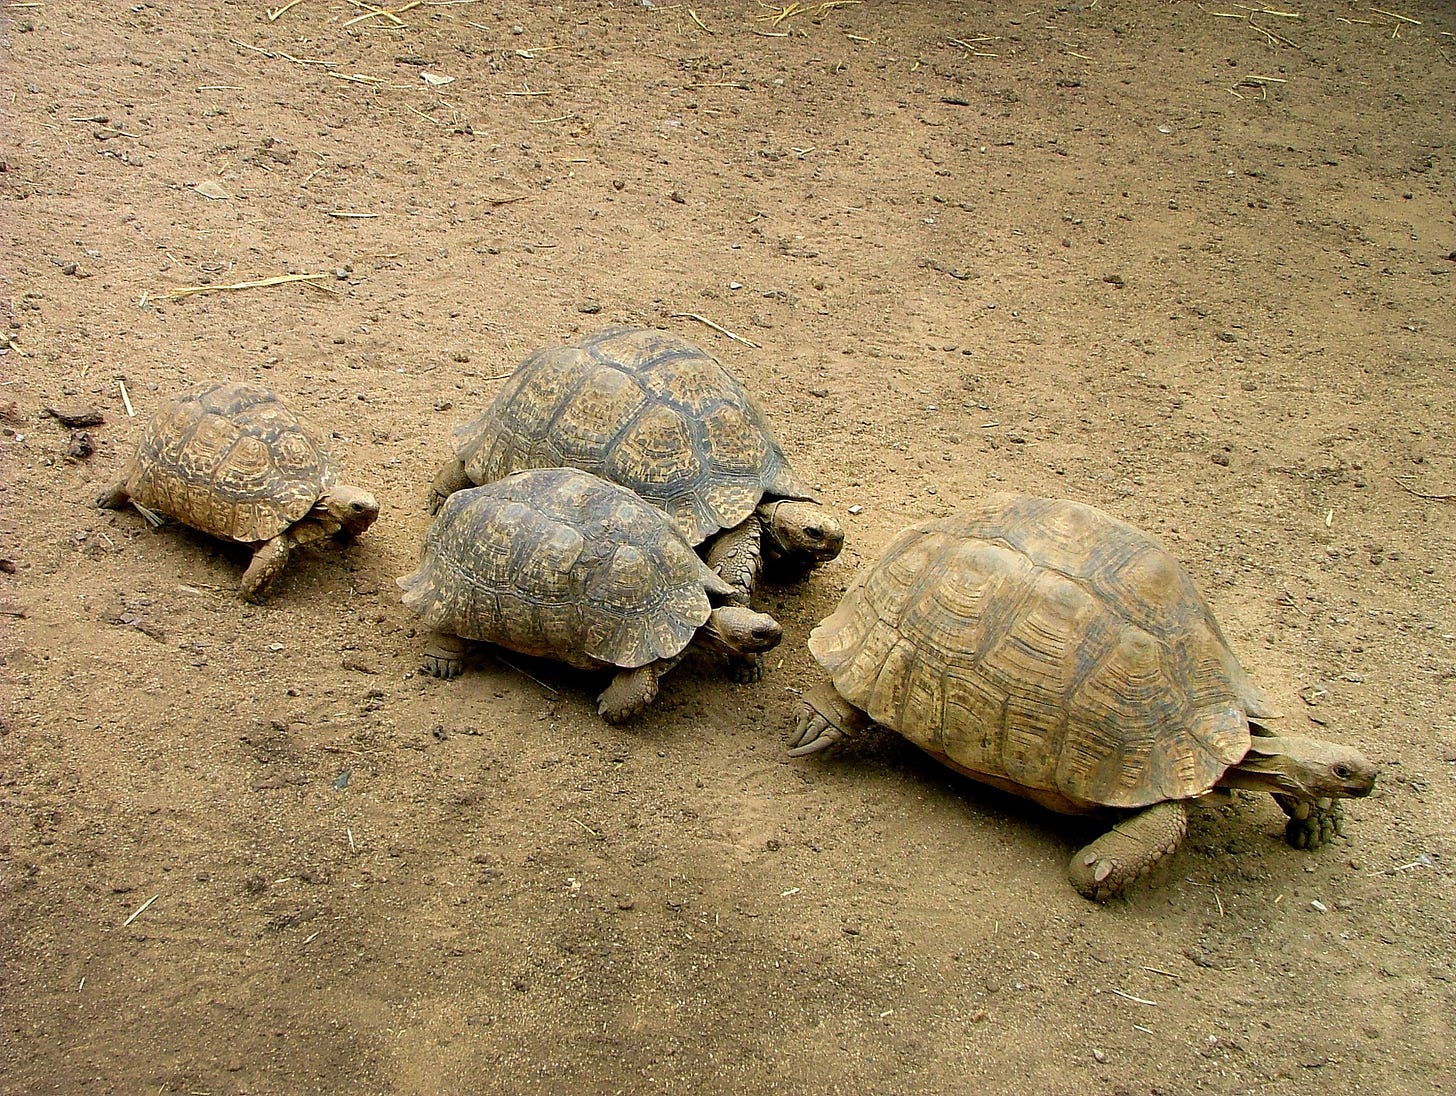 A picture of four tortoises walking across a dirt road